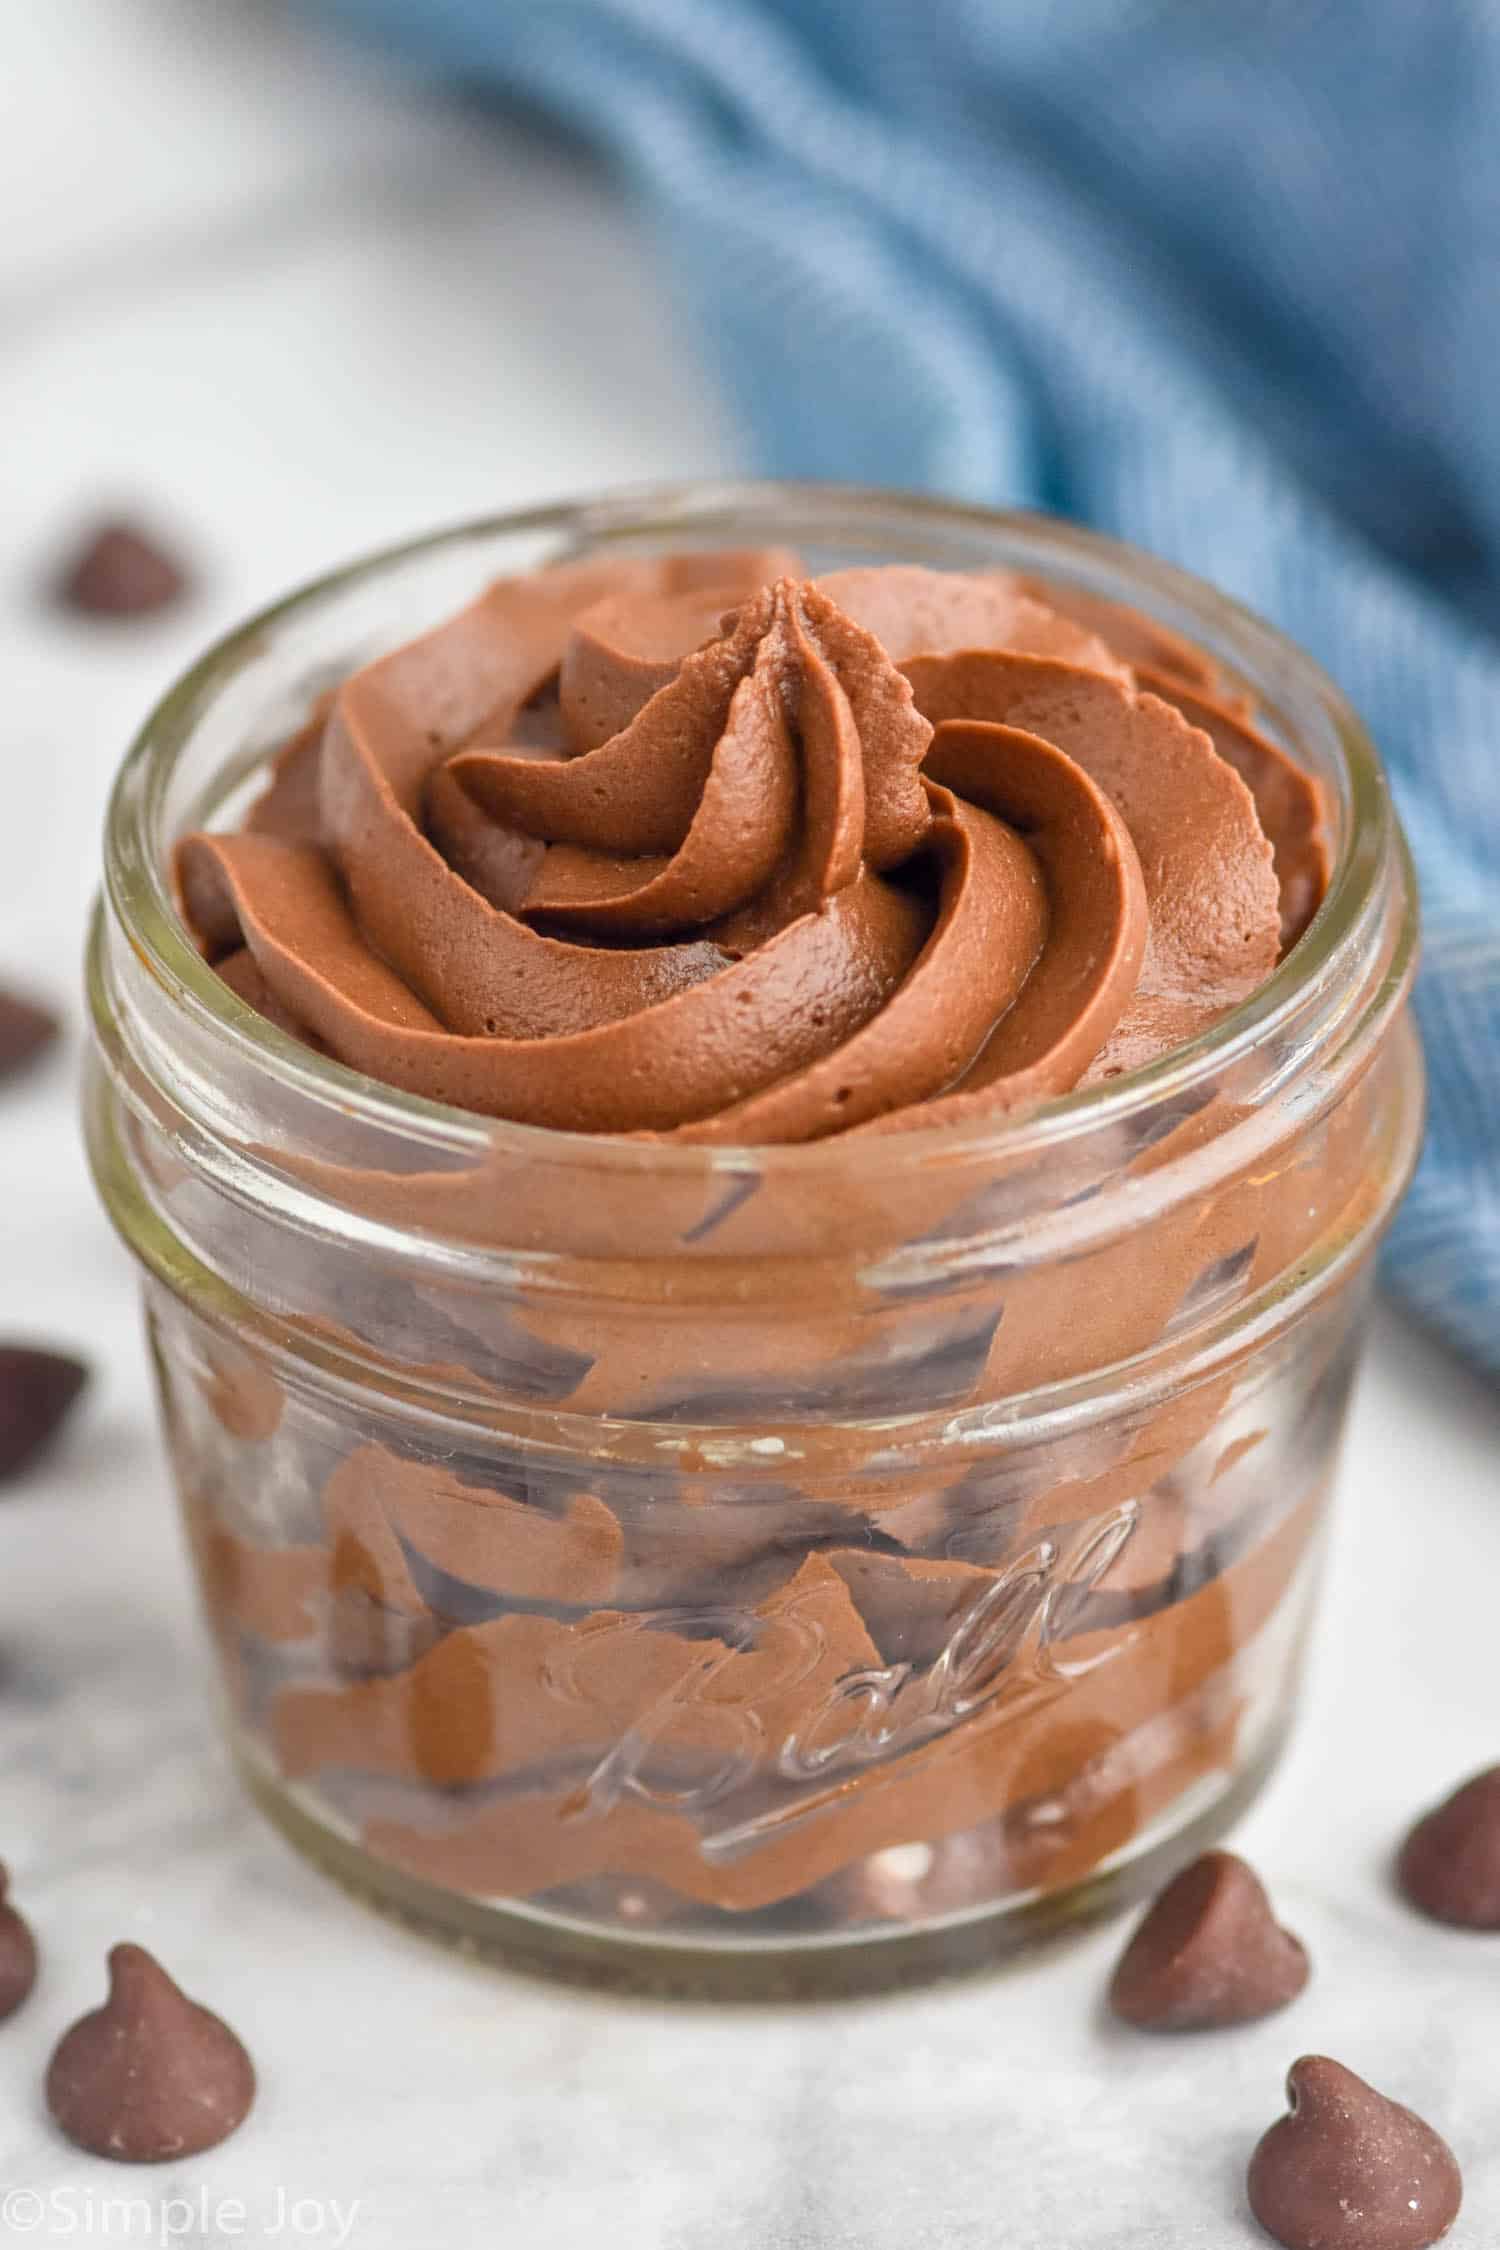 Jar of Chocolate Cream Cheese Frosting with chocolate chips beside